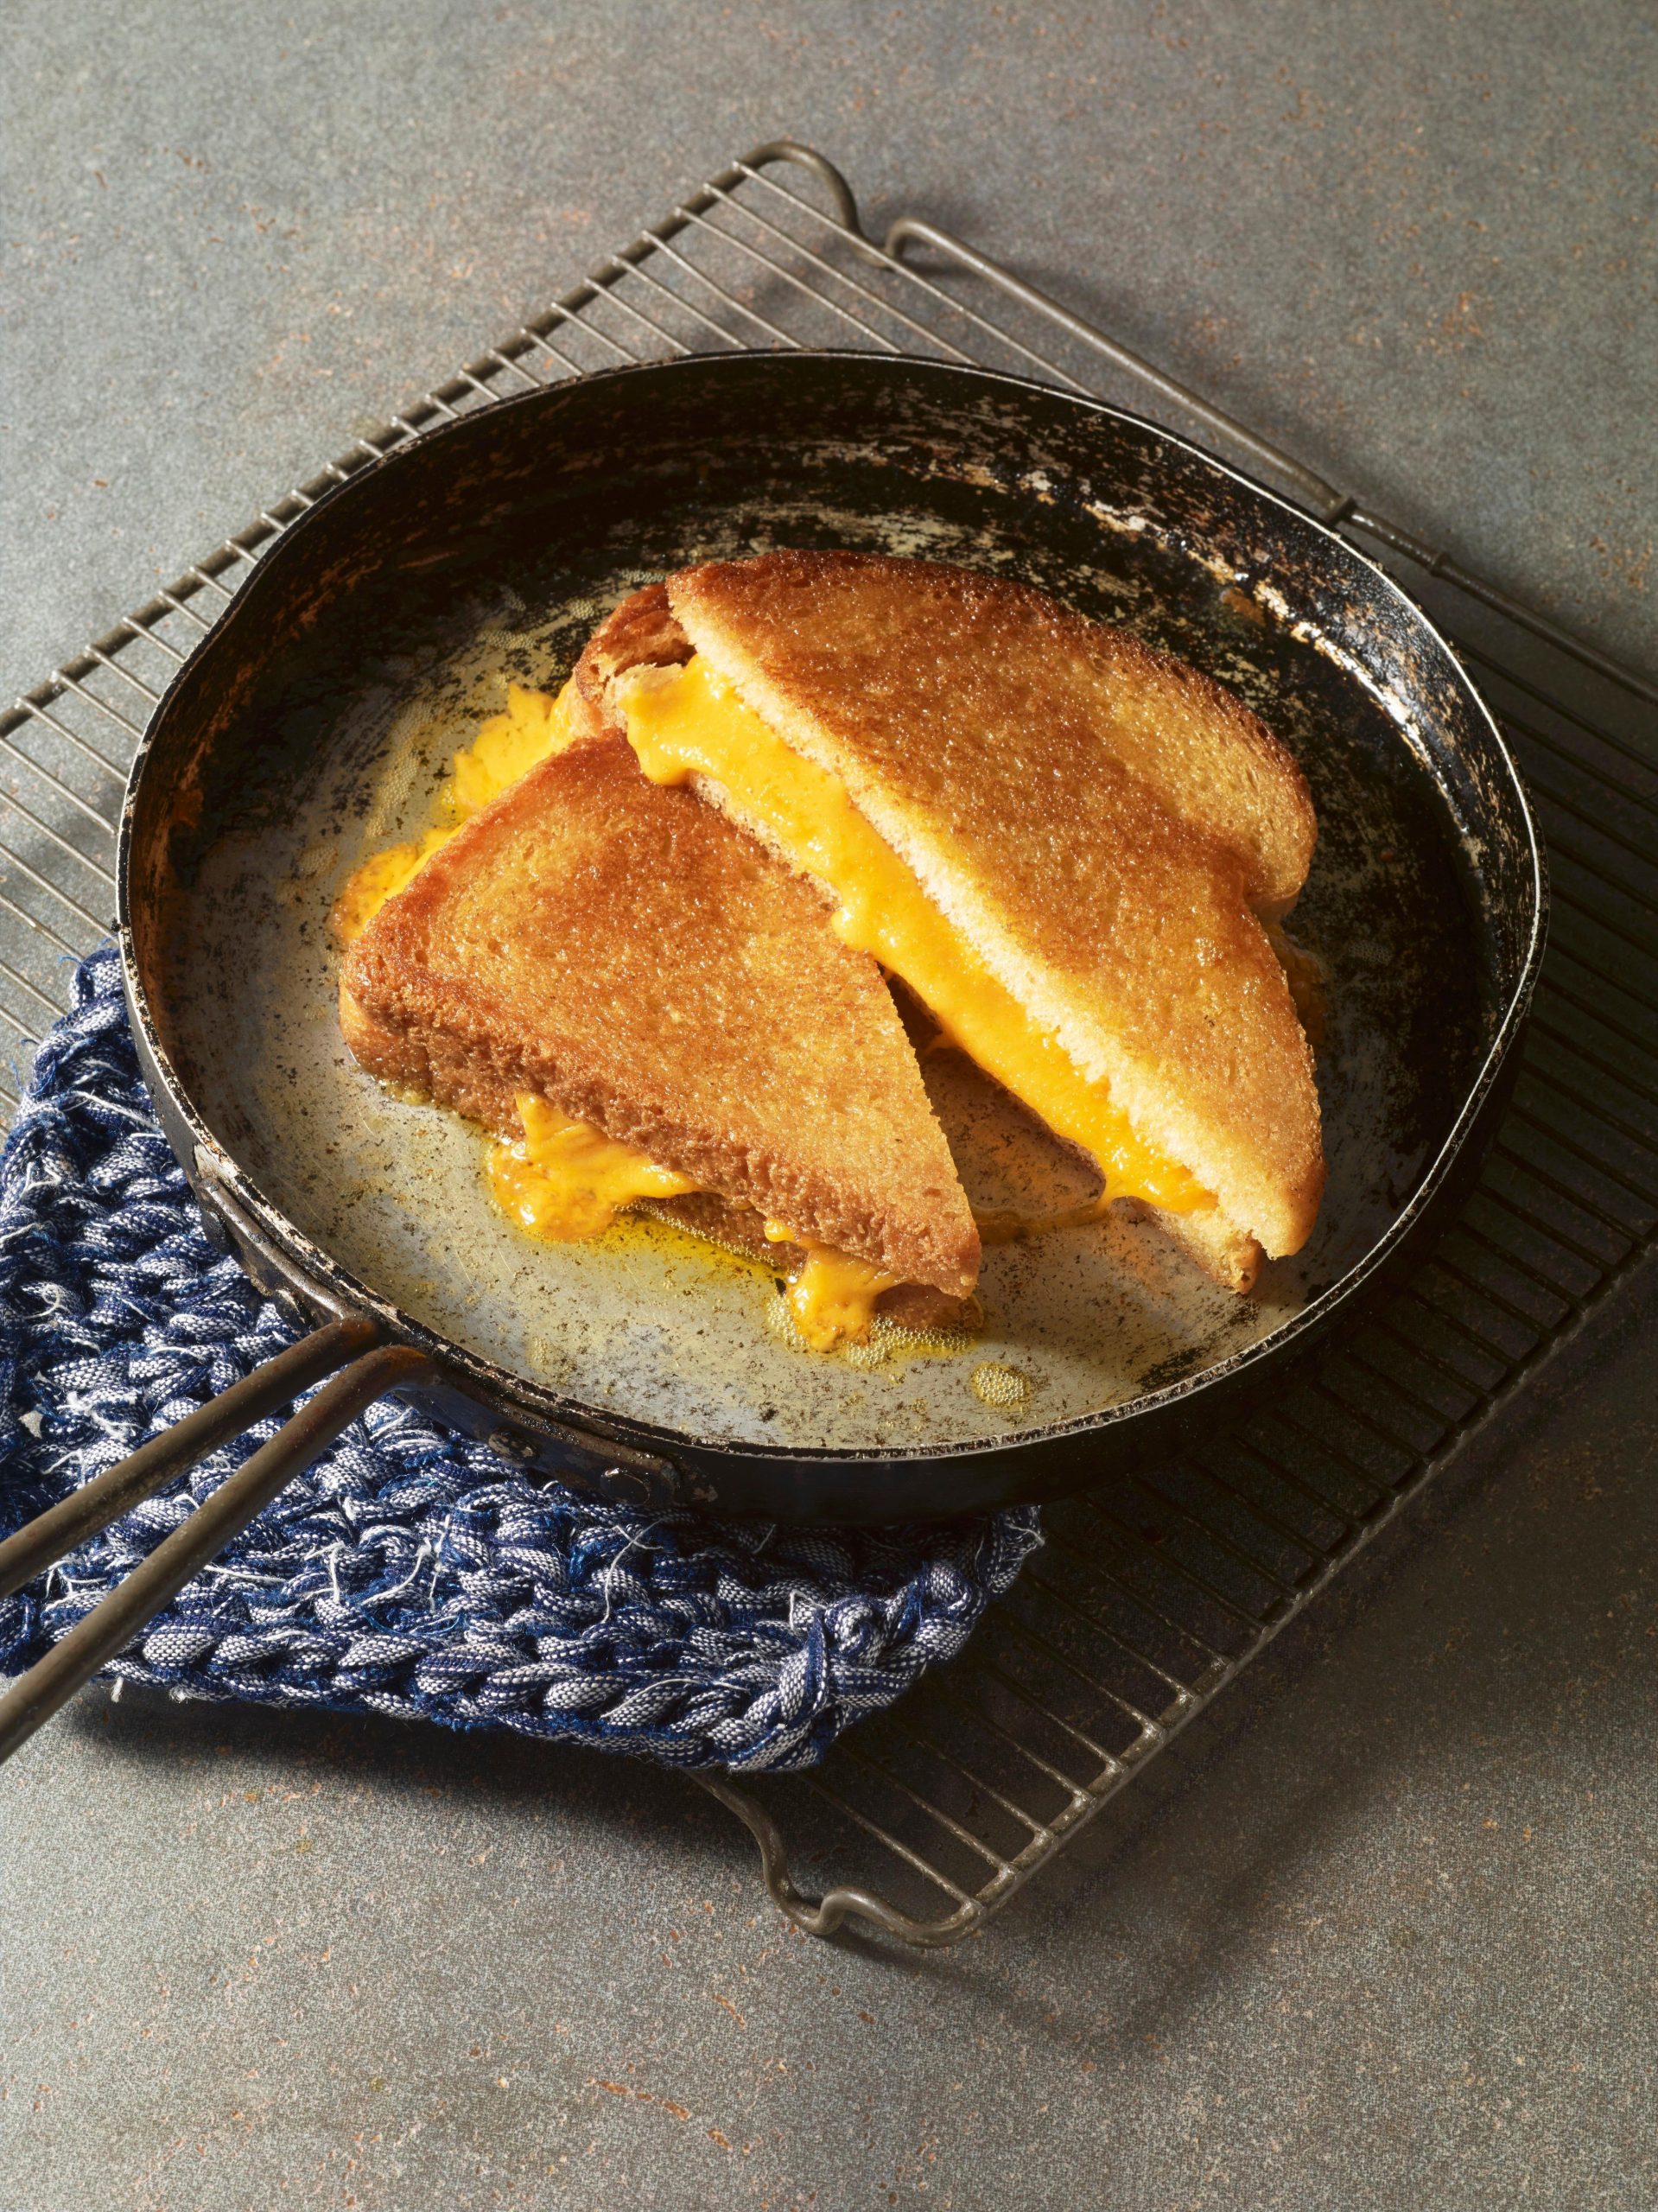 How to Make the Perfect Grilled Cheese